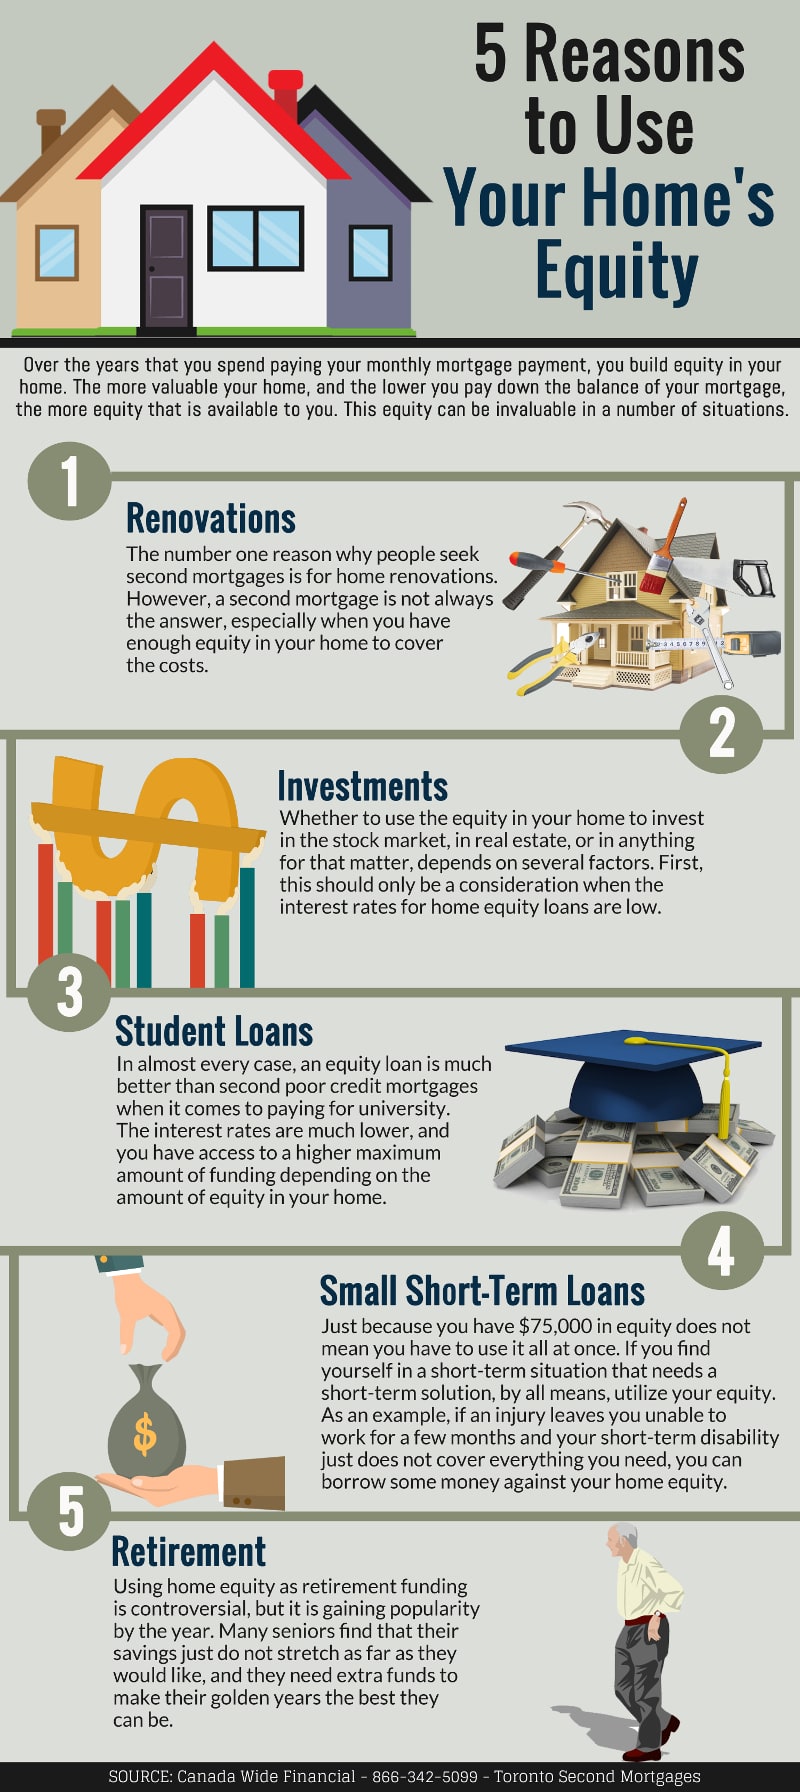 5 Reasons to Use Your Homes Equity - Infographic